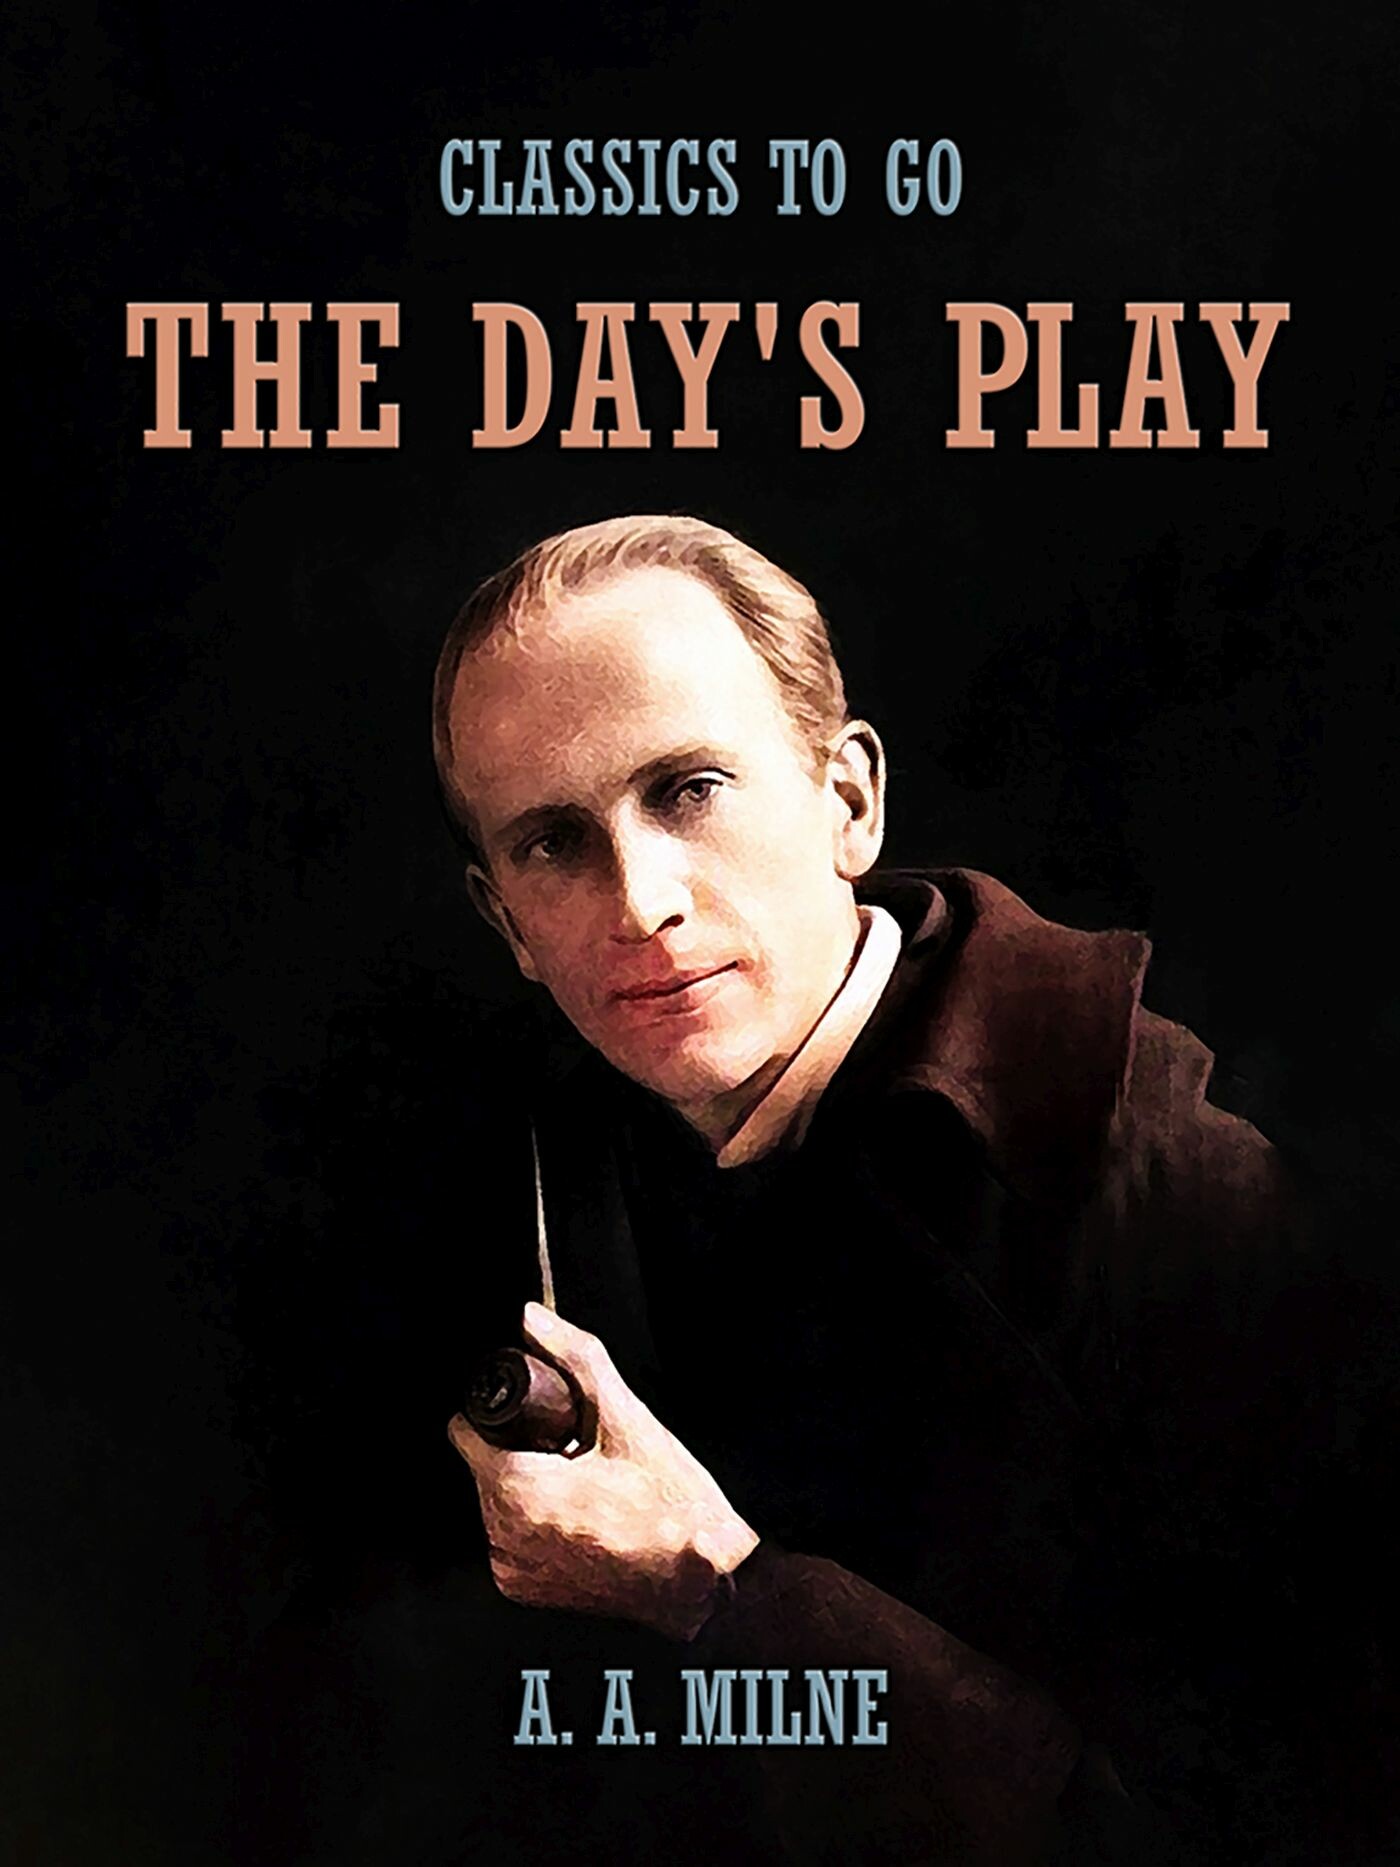 The Day's Play